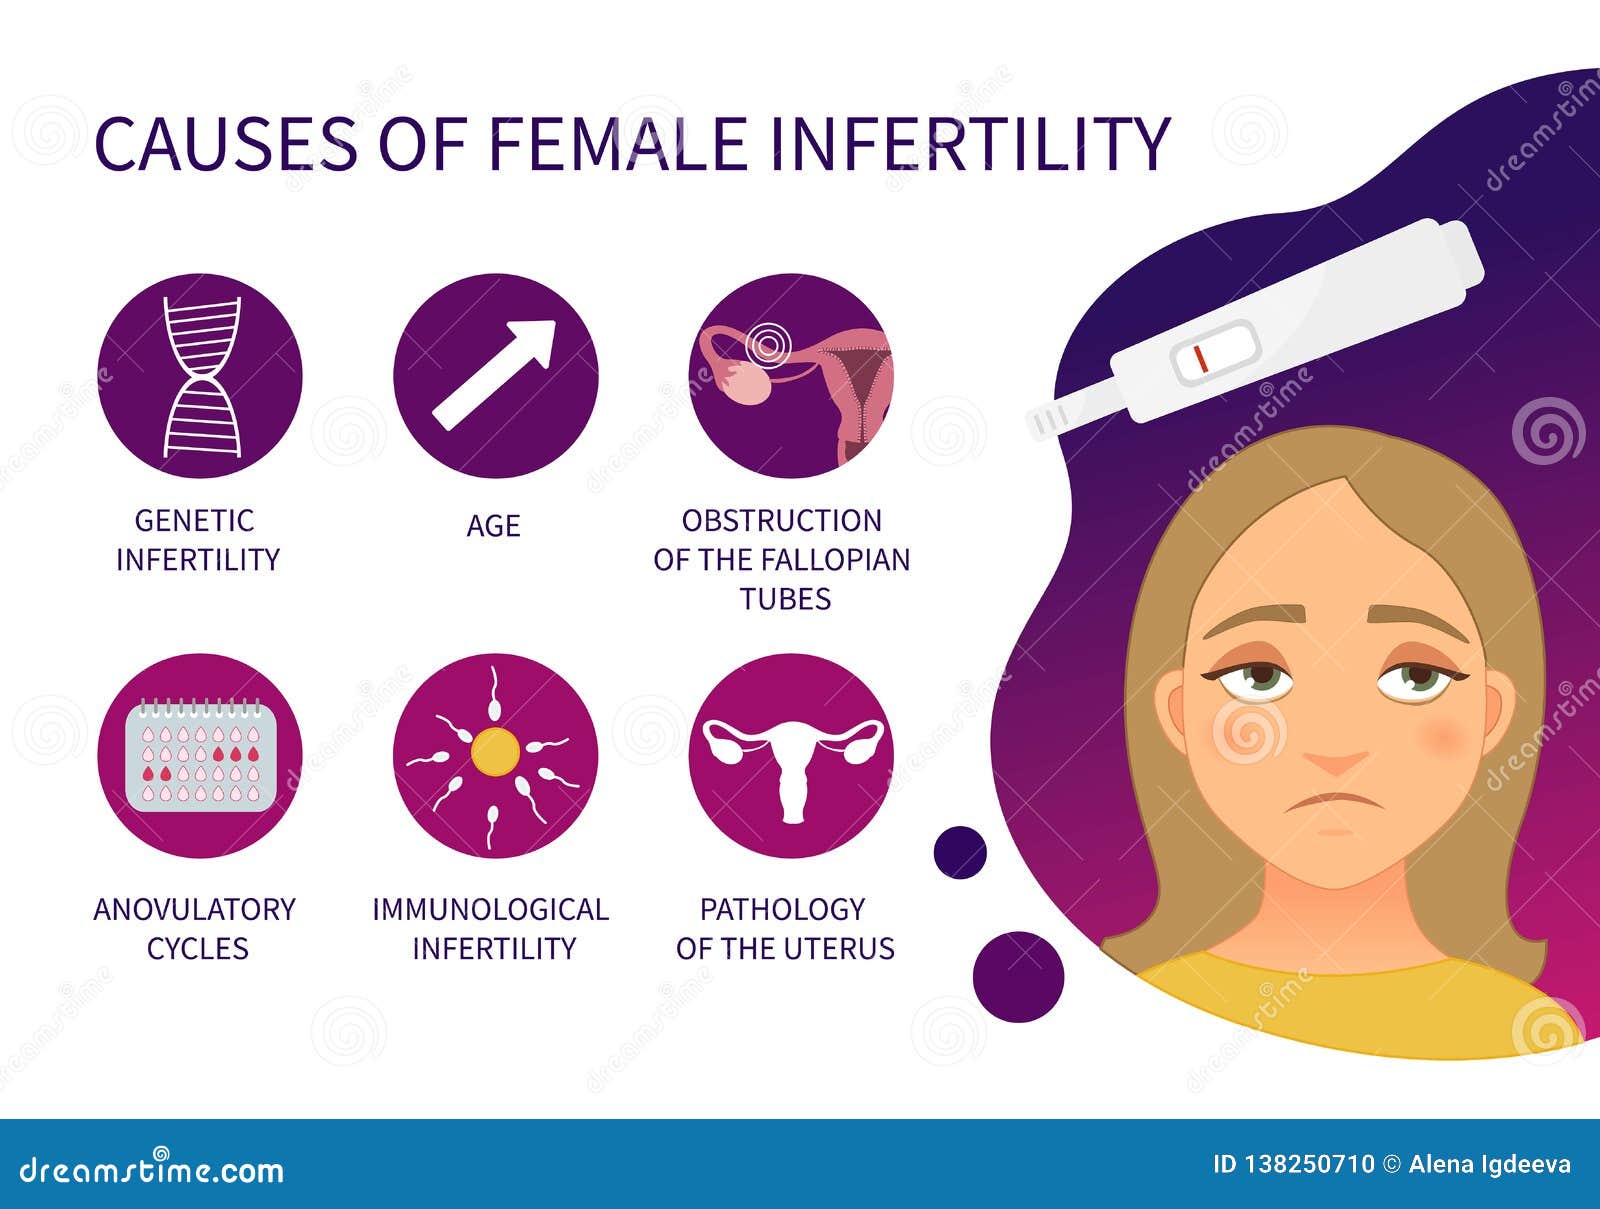  poster causes of female infertility.